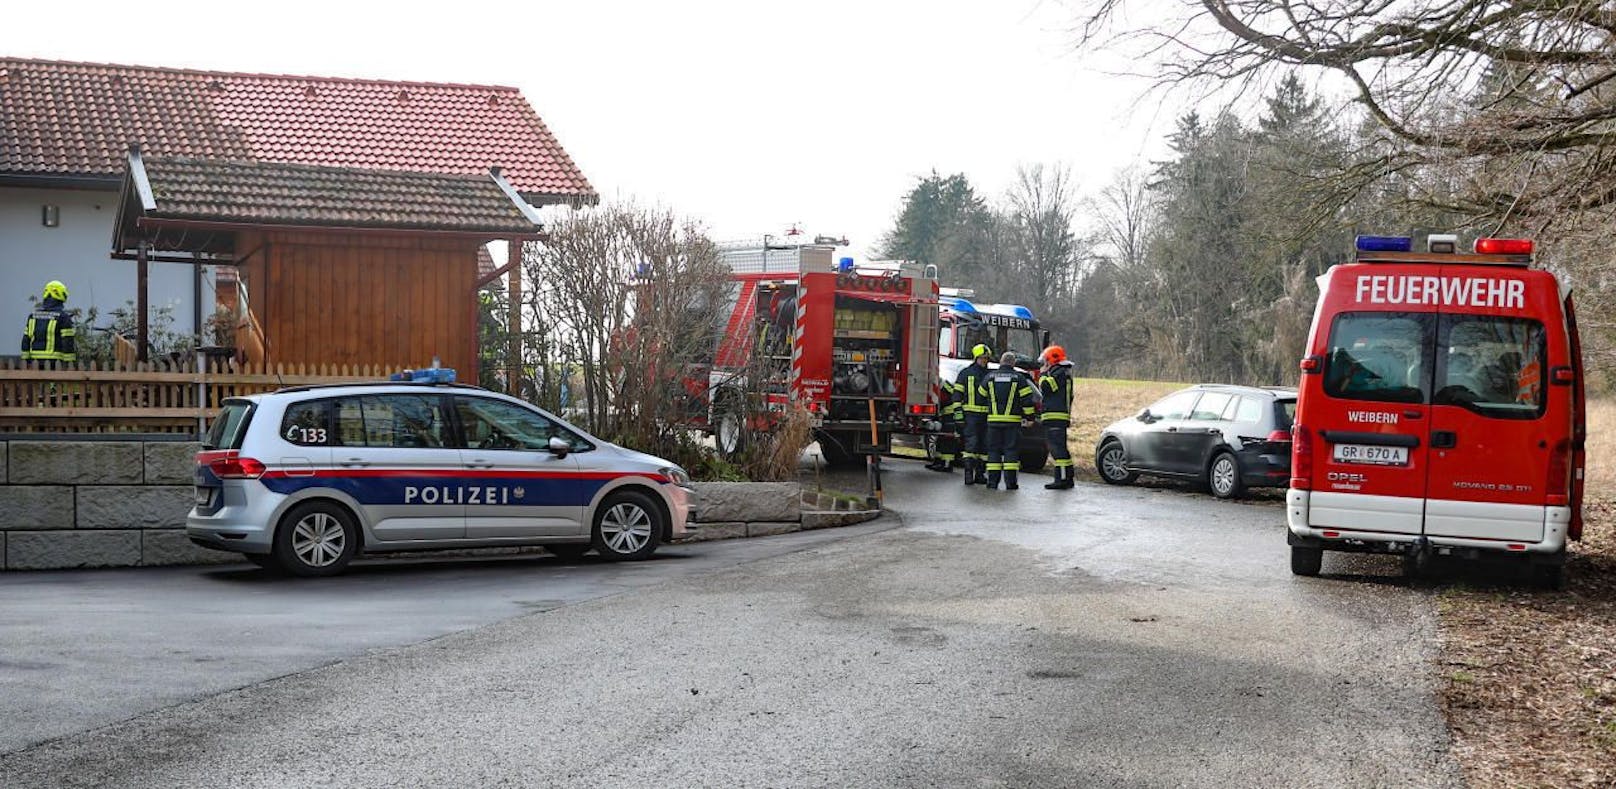 Tote bei Feuer in Einfamilien-Haus: Mord?